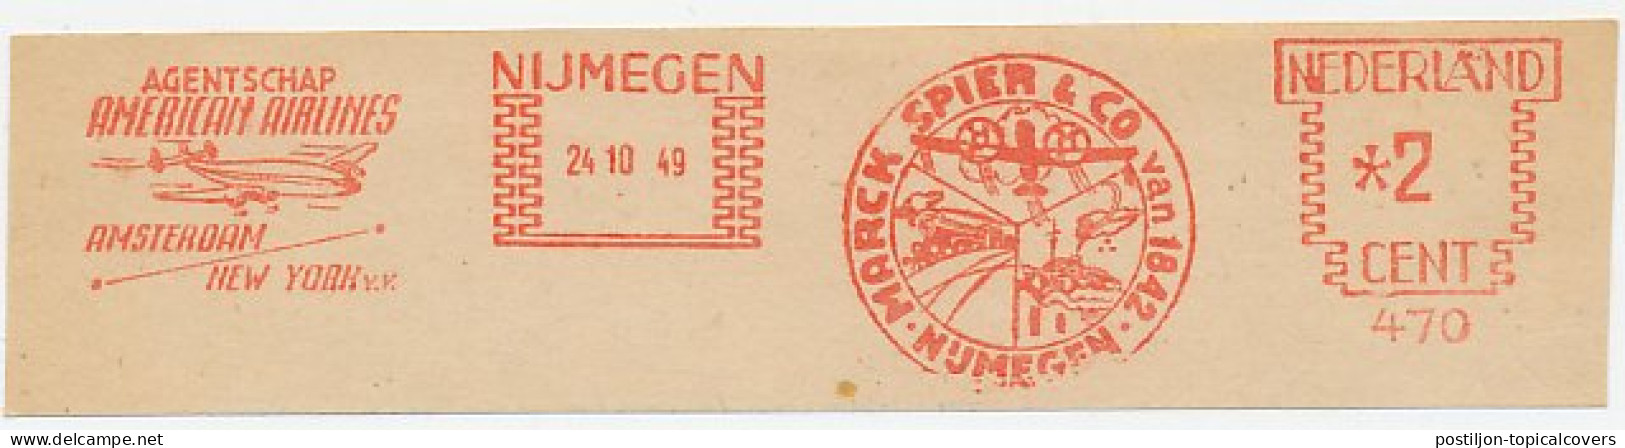 Meter Cut Netherlands 1949 Agency American Airlines - Amsterdam - New York - Airplane - Flugzeuge